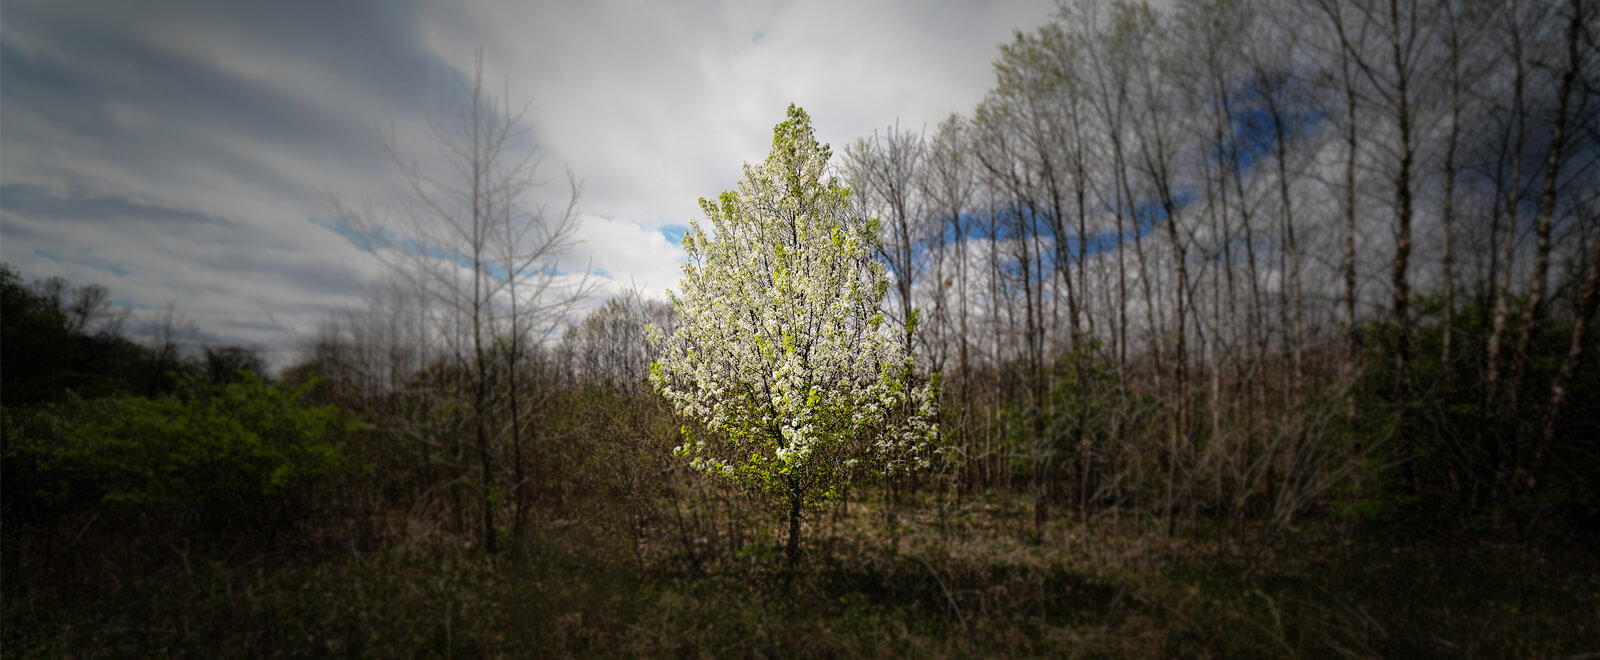 New Program Pays Landowners for Carbon in Their Trees